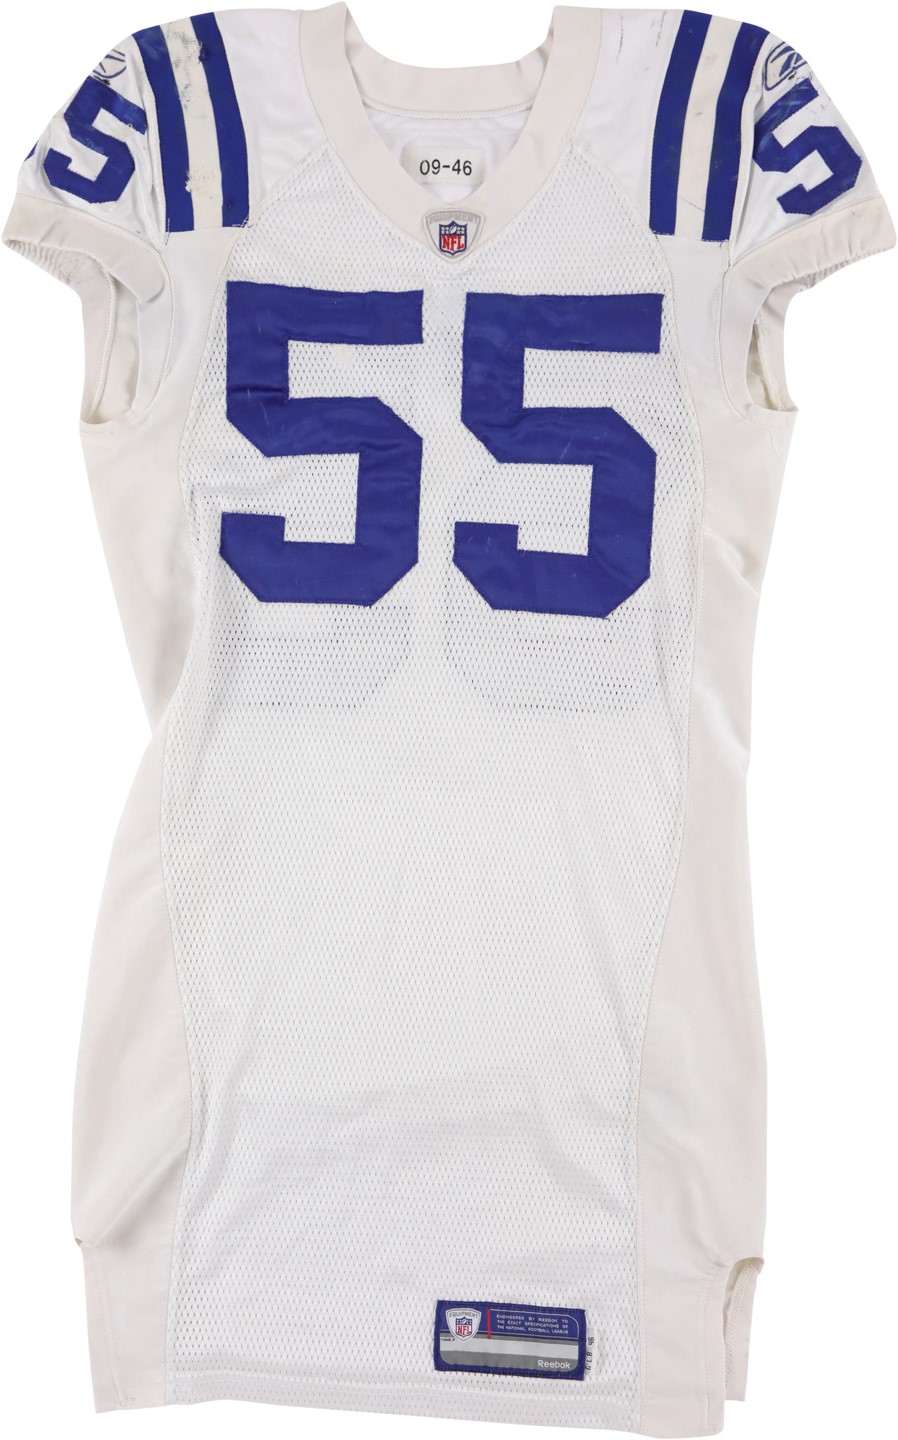 2009 Clint Session Indianapolis Colts "Pick Six" Signed Game Worn Jersey - Photo-Matched to Five Games (NFL PSA)